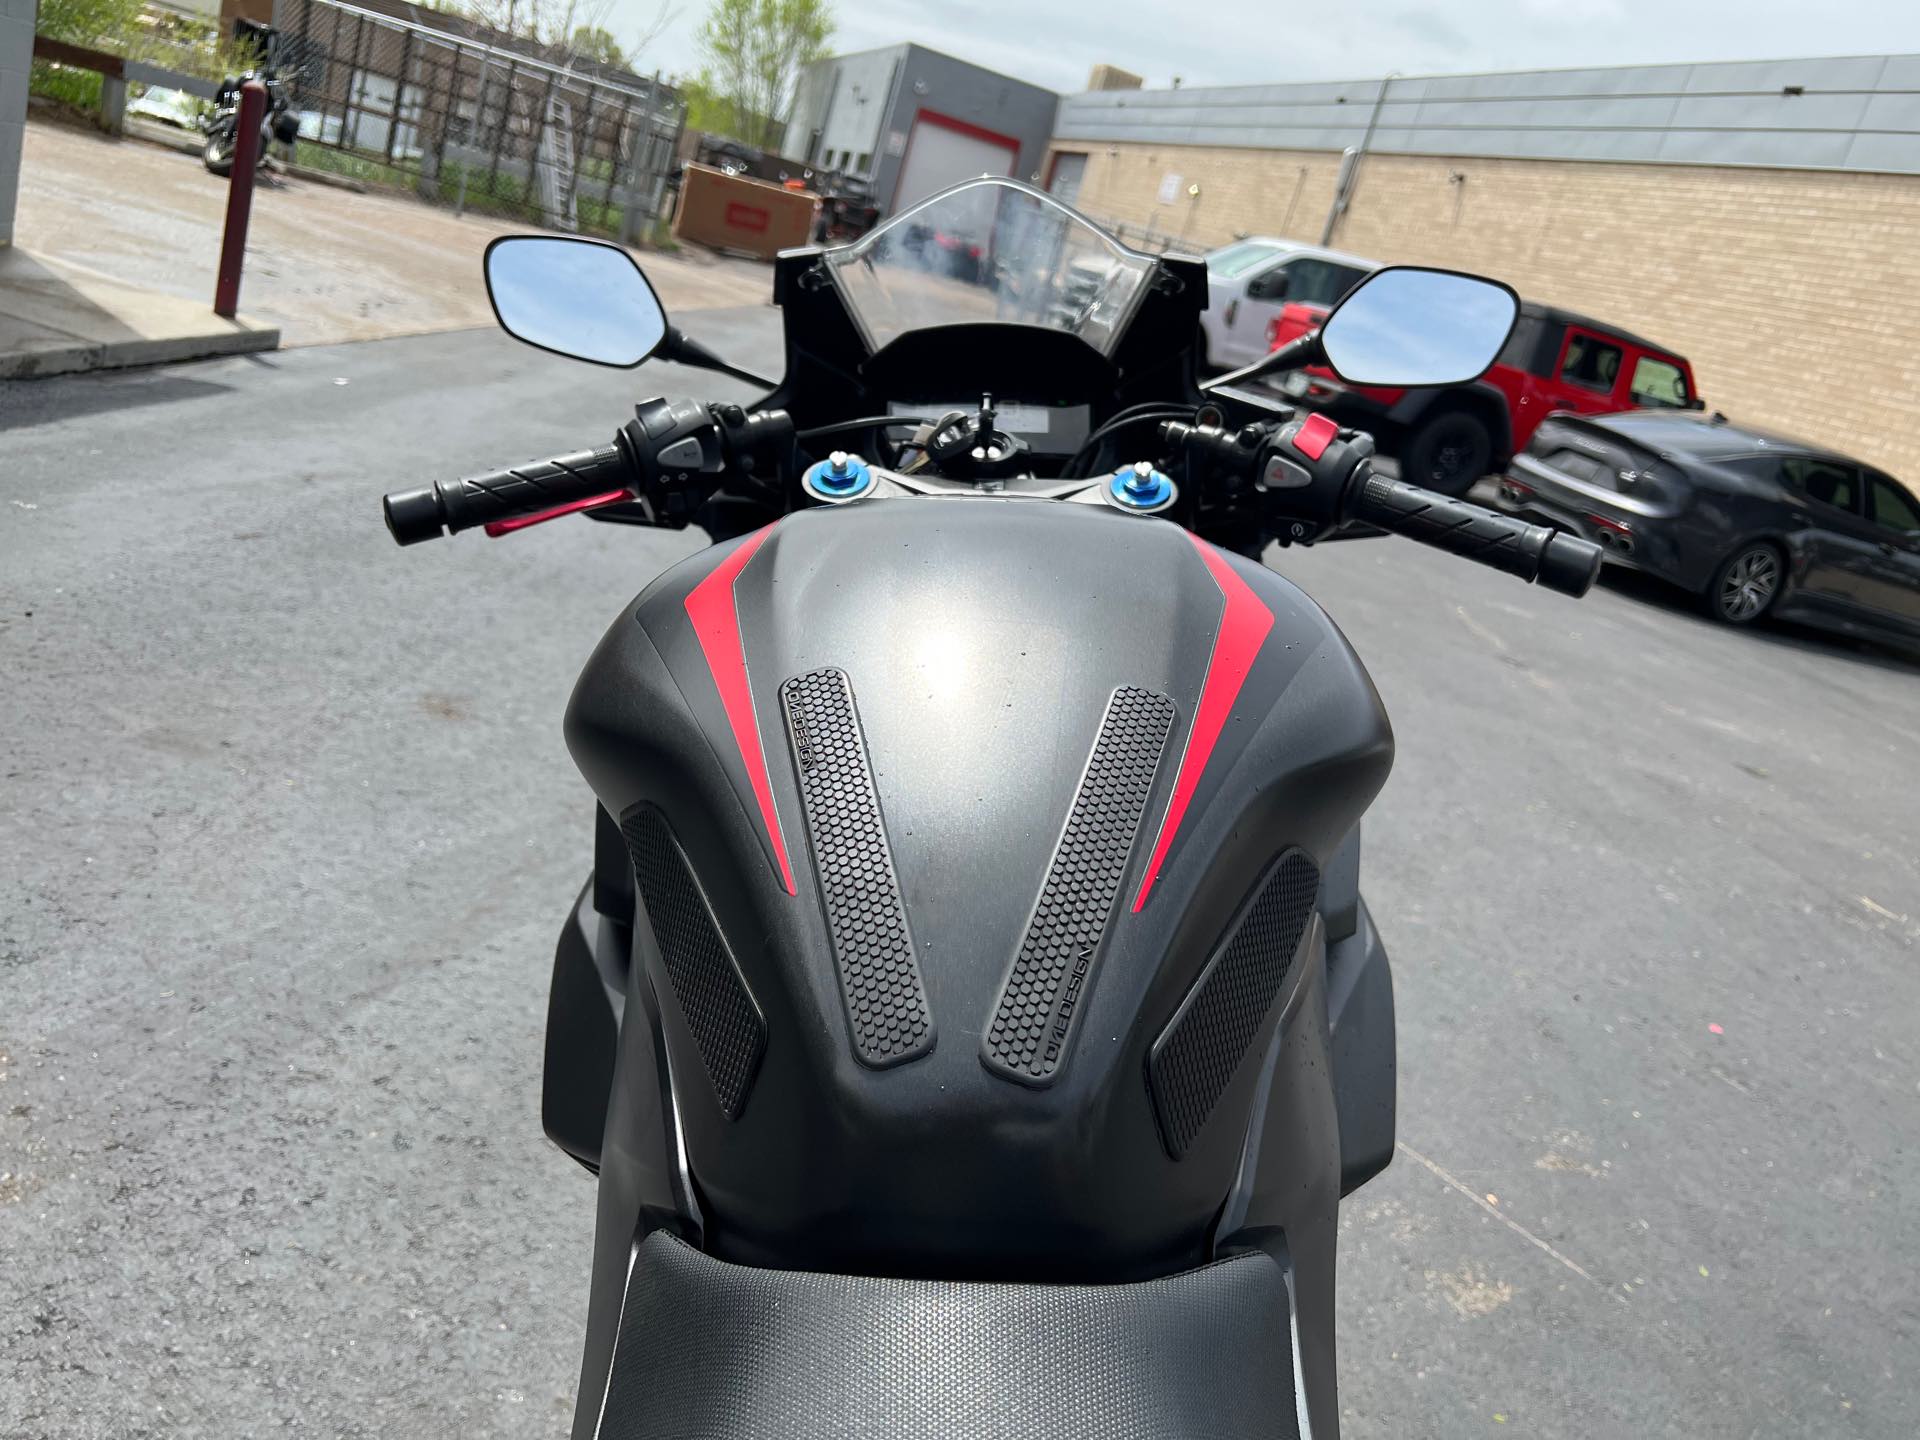 2021 Honda CBR500R ABS at Aces Motorcycles - Fort Collins